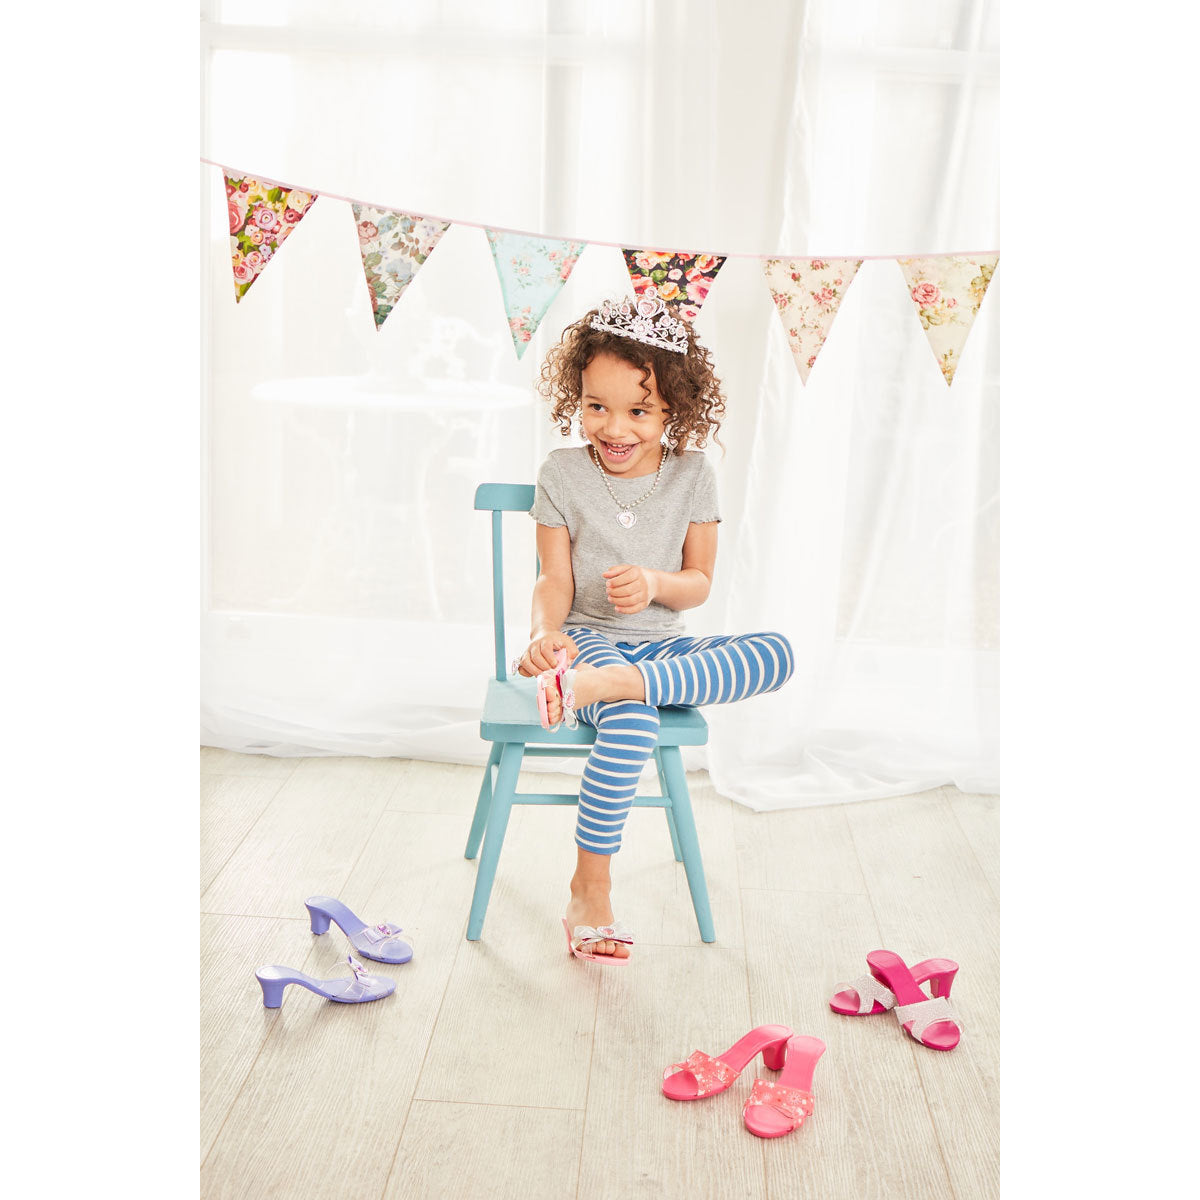 Early Learning Centre Dress Up Shoes and Jewellery Set